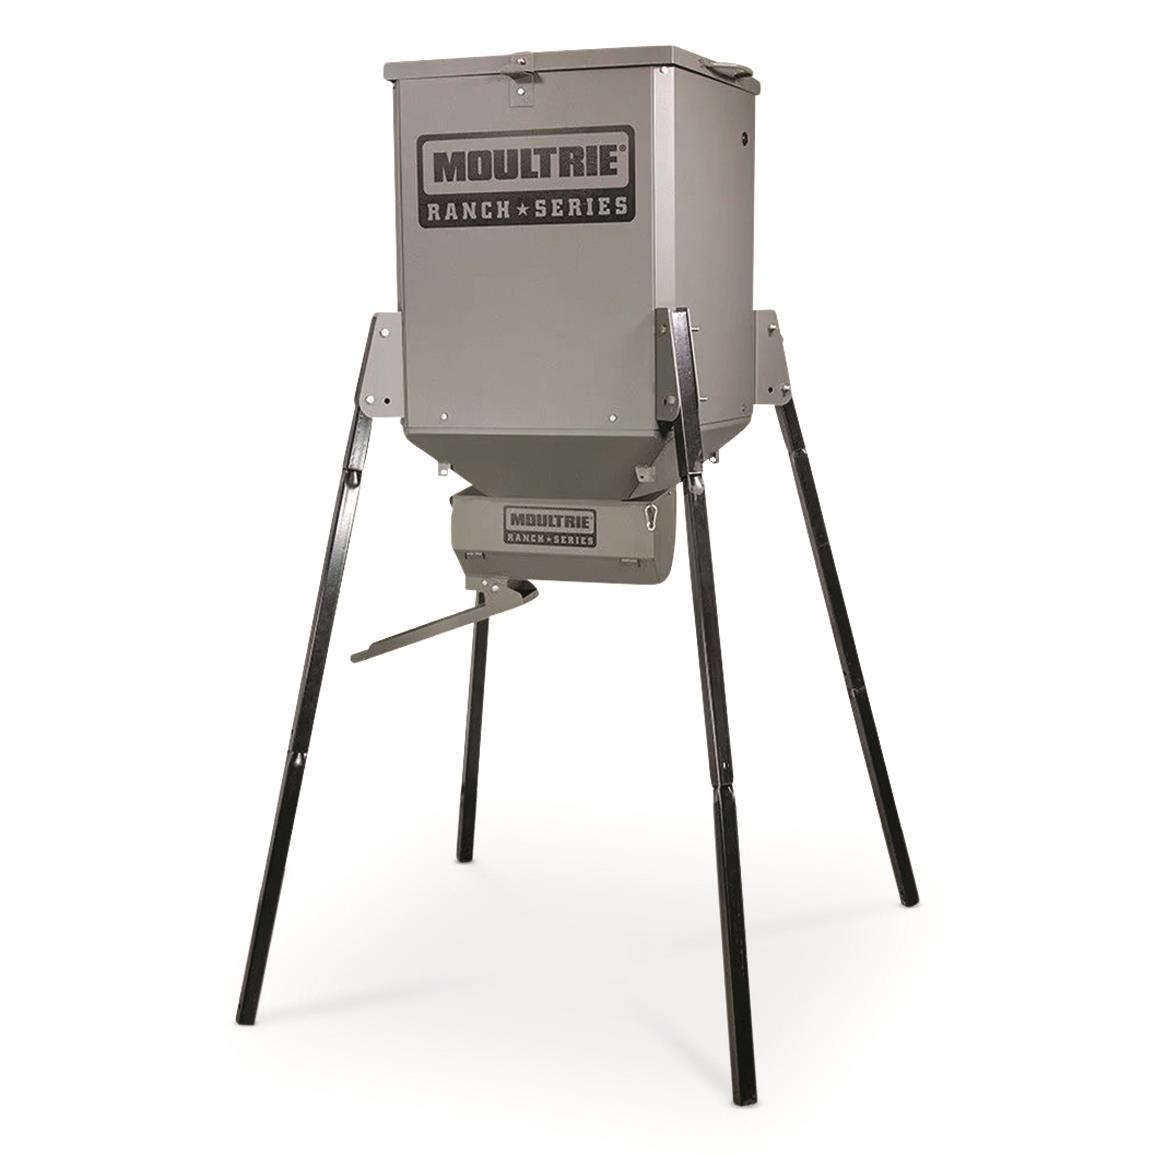 Moultrie Ranch Series Auger Feeder, 300-lb. Capacity